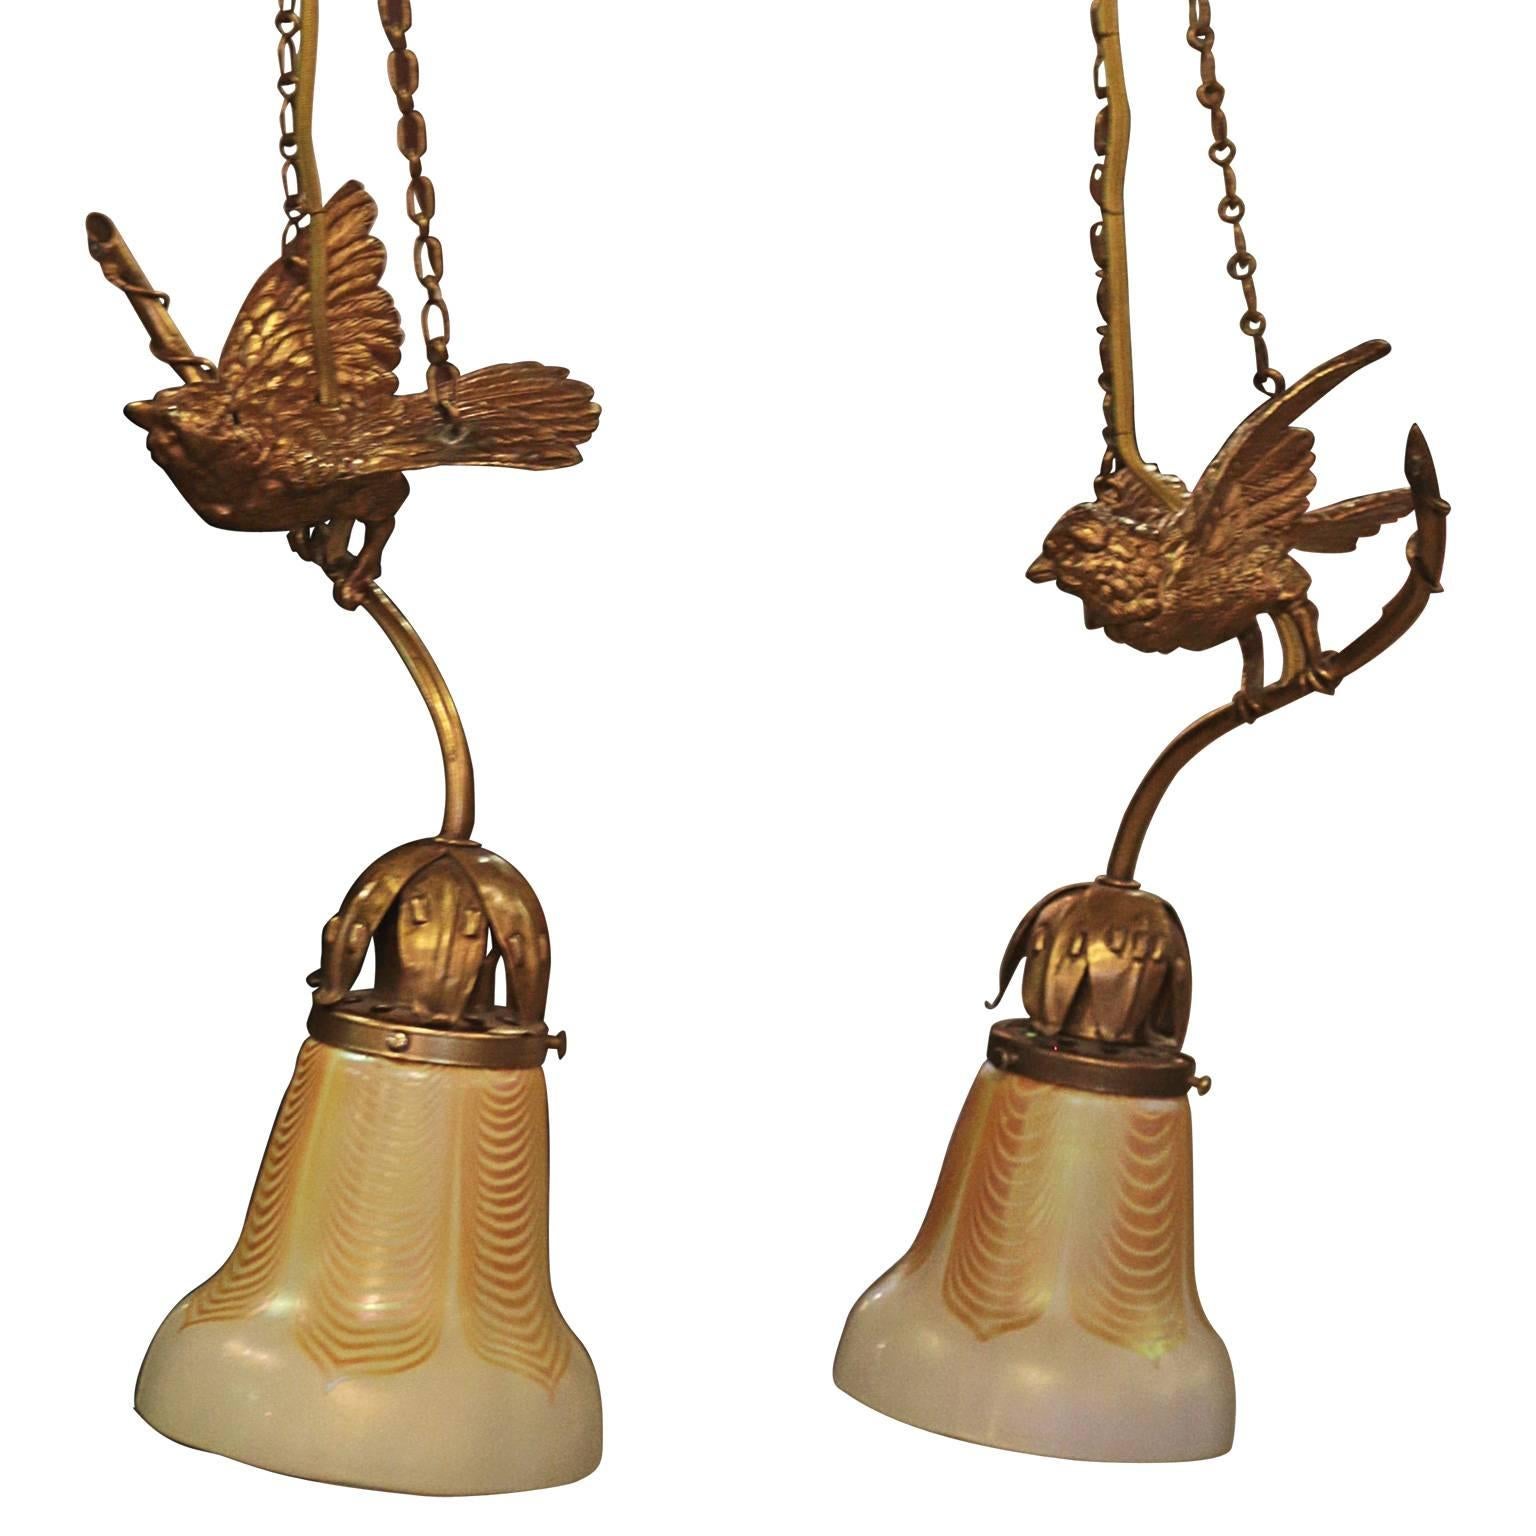 This great pair ormolu hanging lights with Steuben shades are in amazing used condition. The form of the birds is excellent and proportioned. The lights hang from a chain connected to any form of hook that a chain may fit. The wire follows the chain